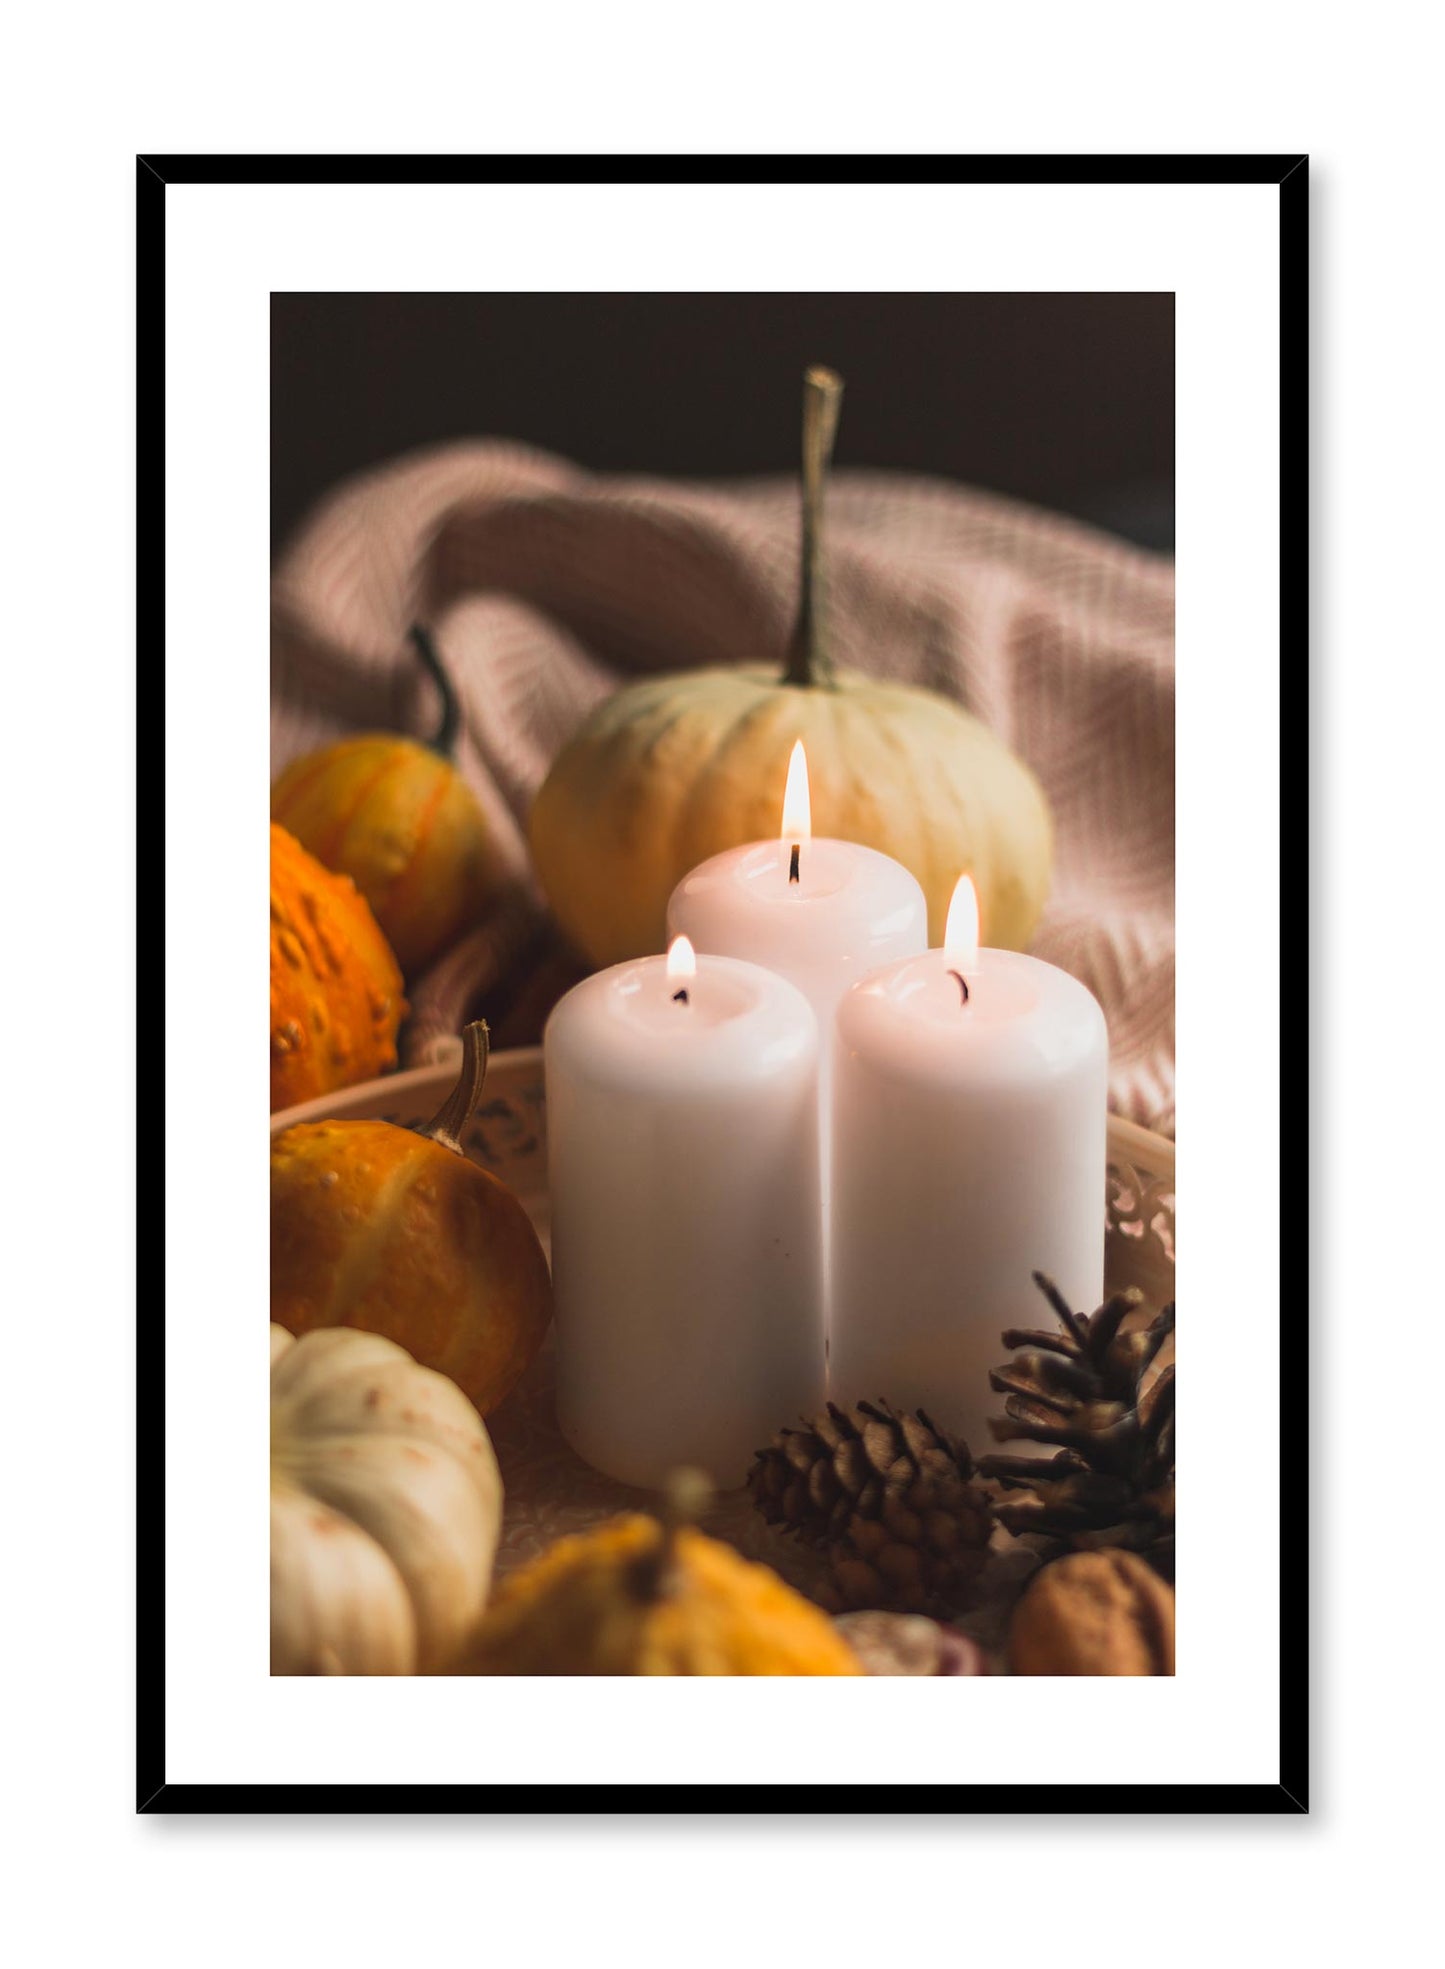 Candlelit is a minimalist photography by Opposite Wall of three lit candles surrounded by small pumpkins.